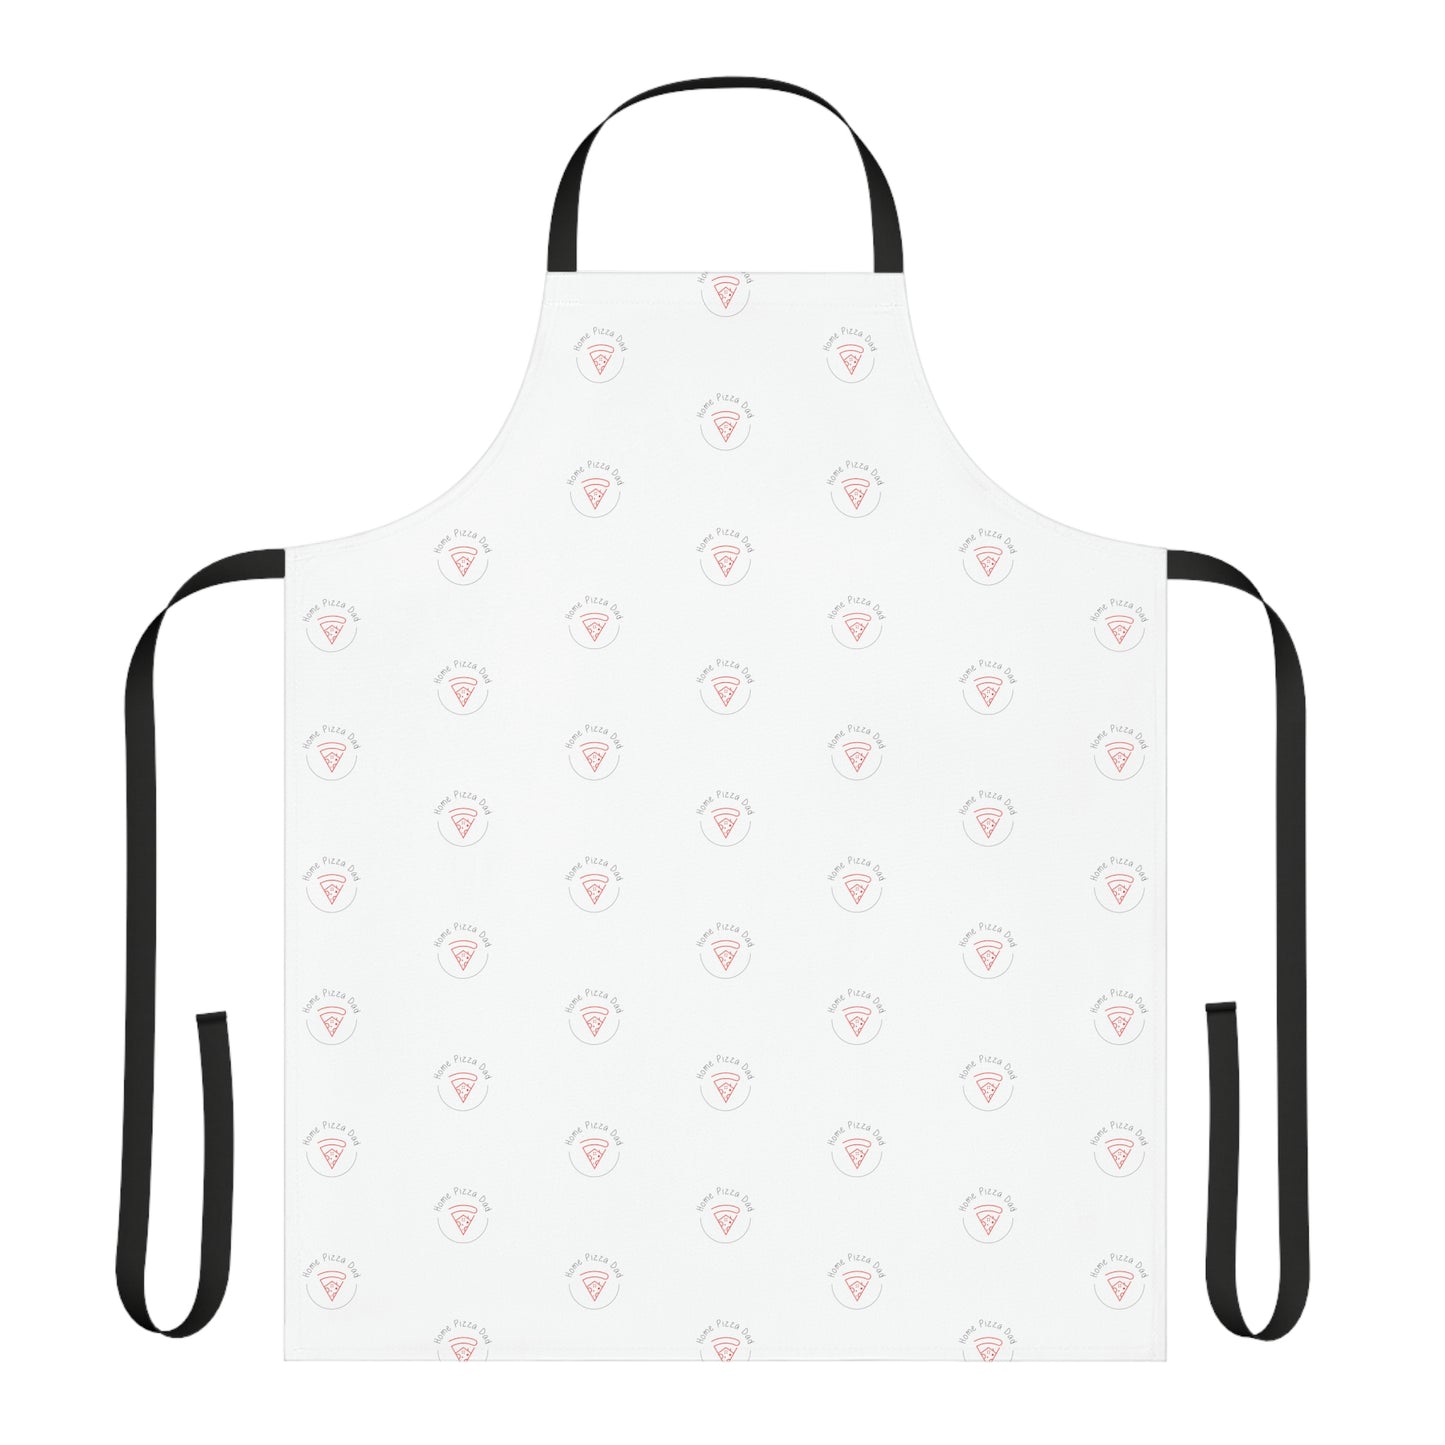 Home Pizza Dad Apron